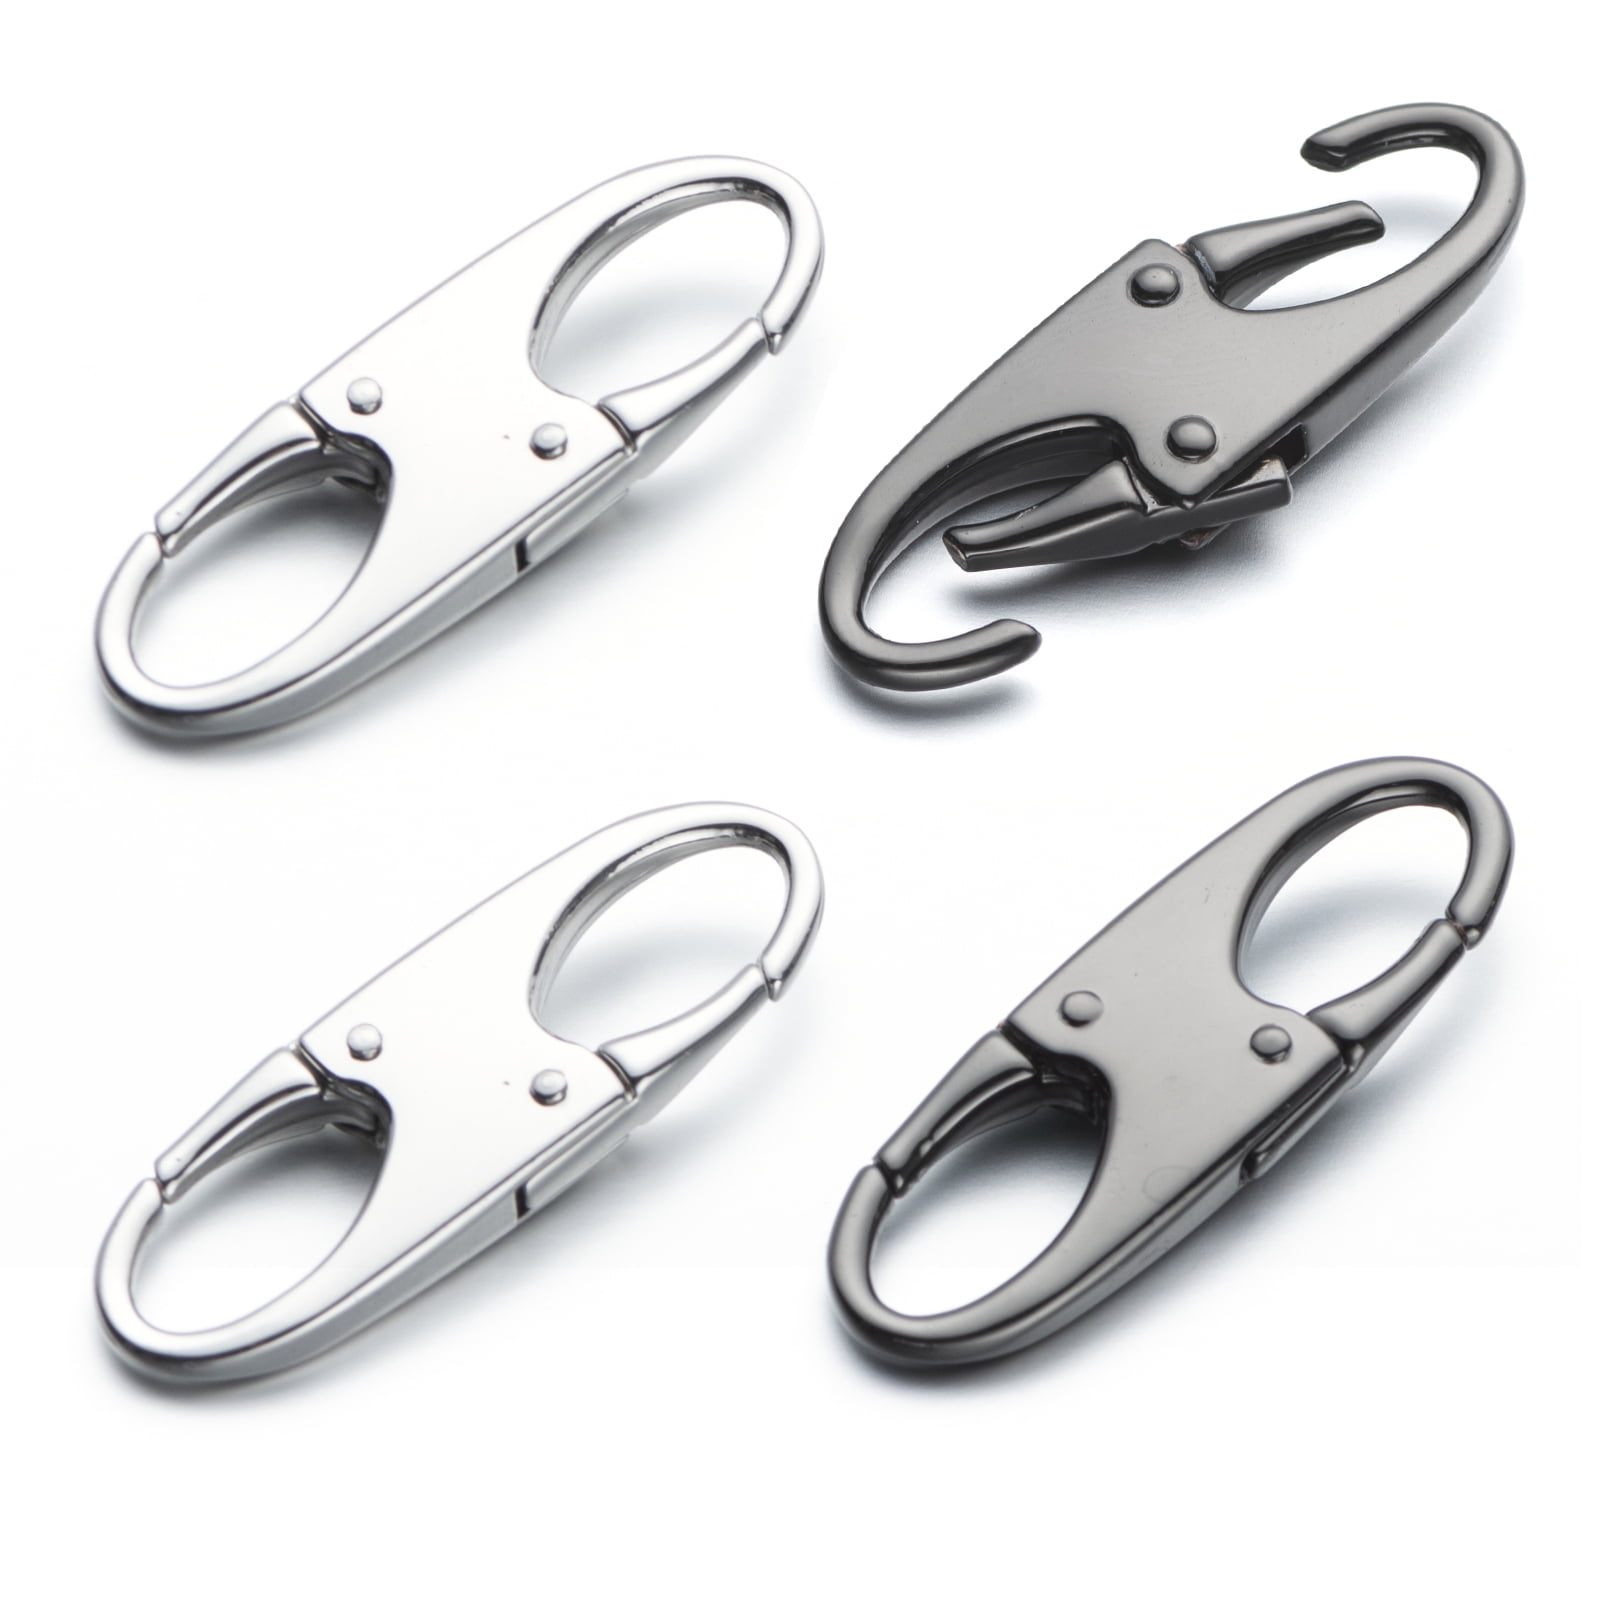 Zpsolution Zipper Pull Replacement - 3 Size More Suitable for Different Zippers - Easy Use for Broken and Missing Zipper Pulls